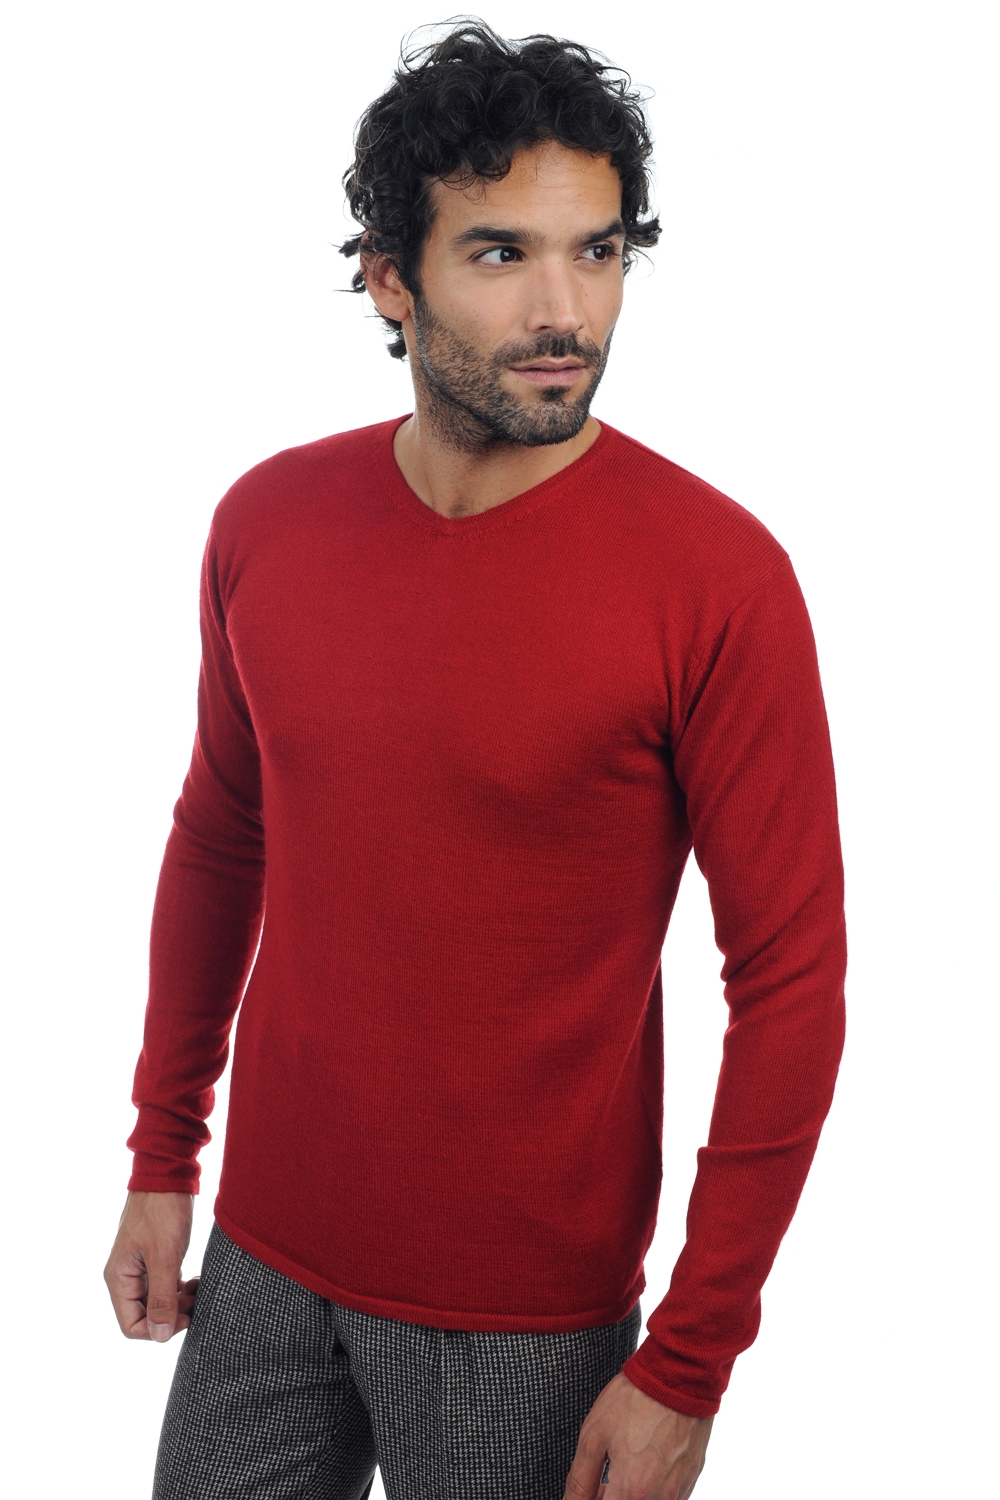 Baby Alpaga pull homme ethan rouge 3xl